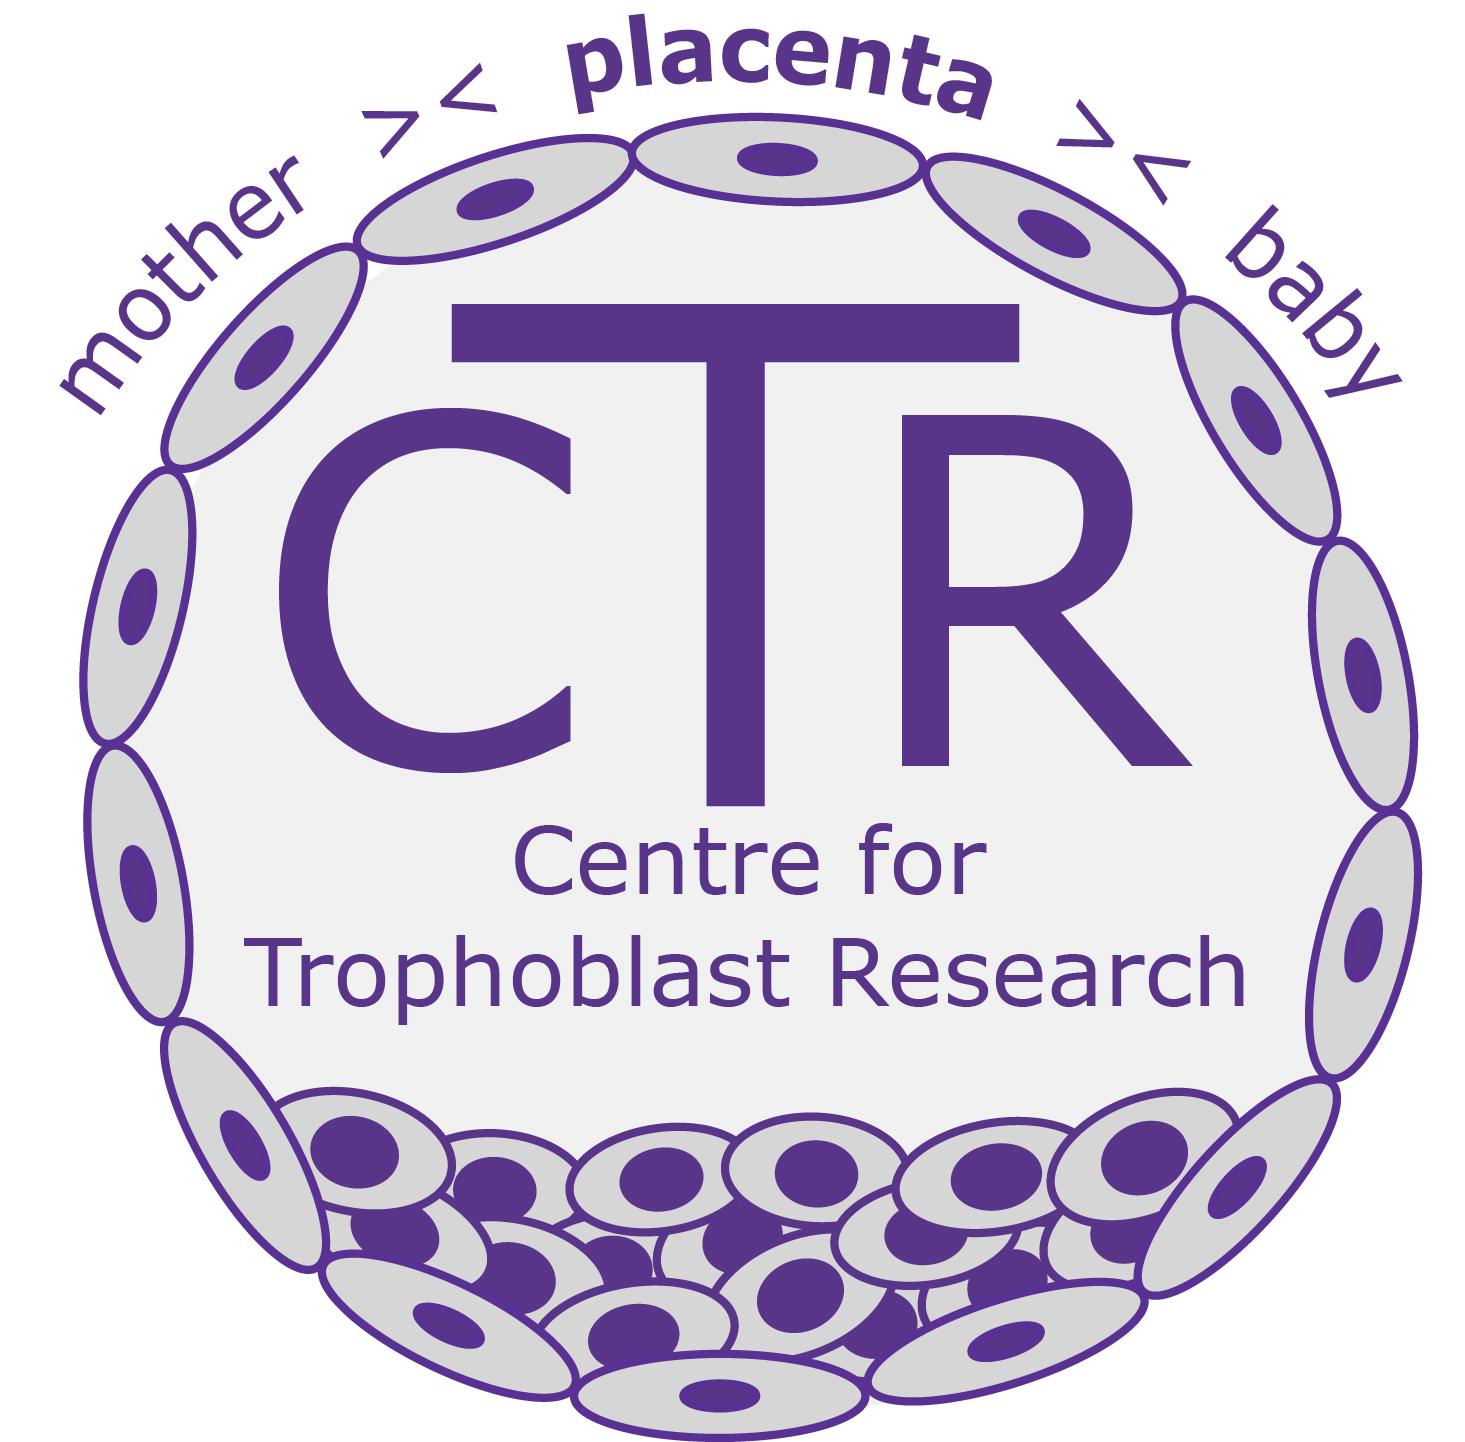 From conception to birth: celebrating a decade of the Centre for Trophoblast Research